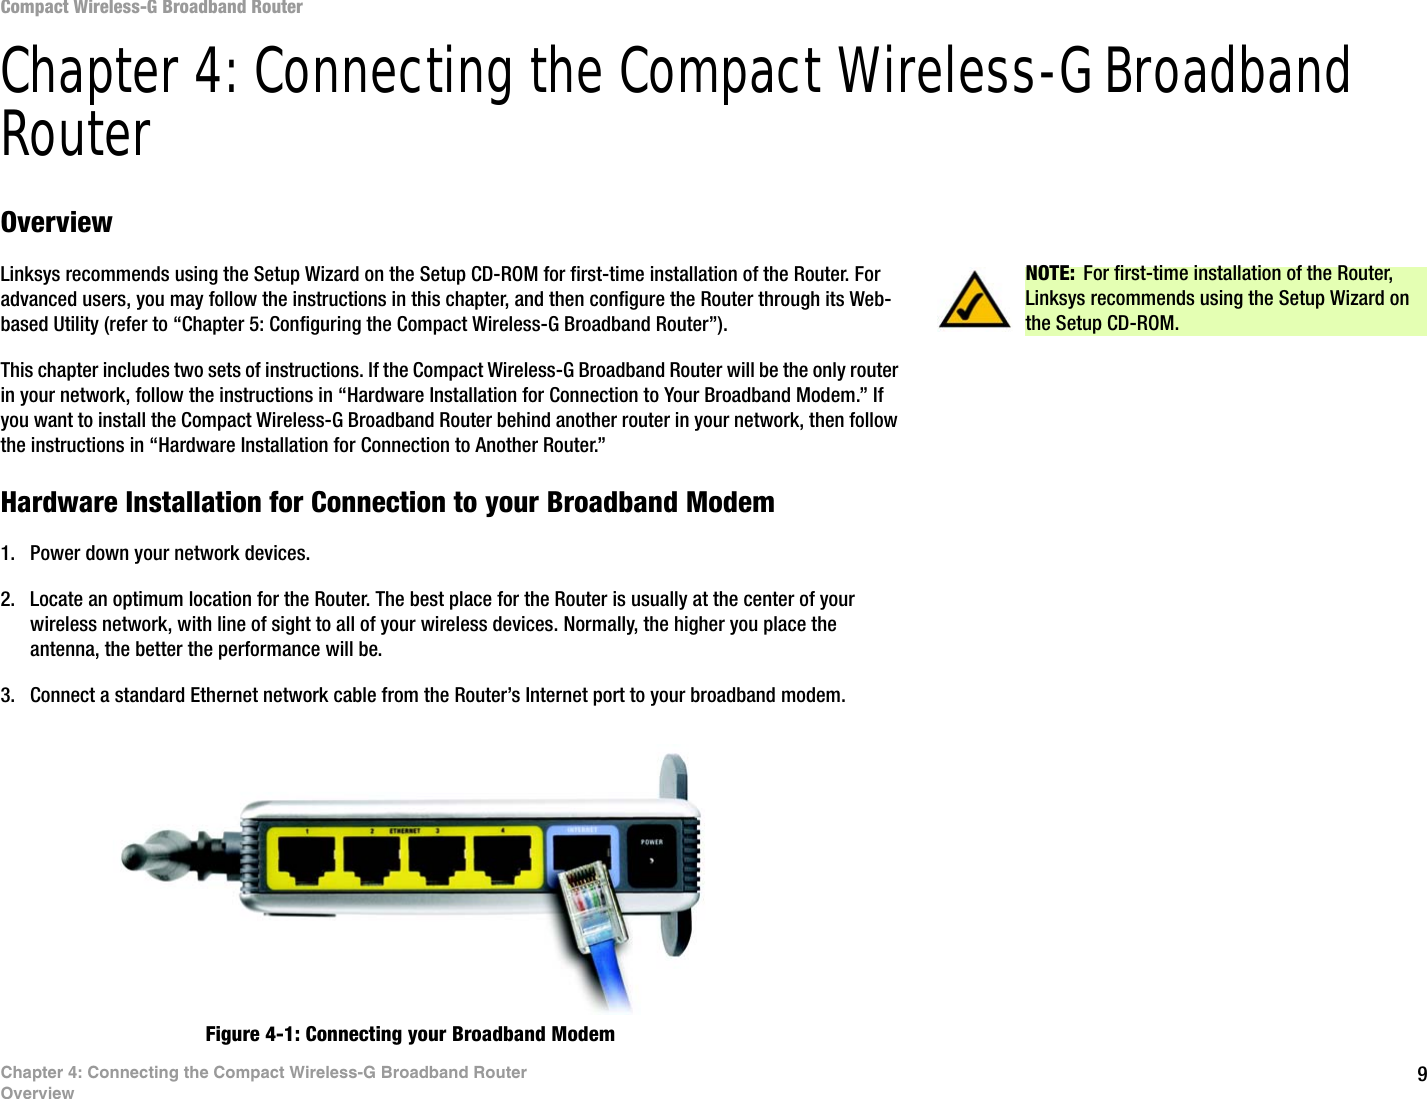 9Chapter 4: Connecting the Compact Wireless-G Broadband RouterOverviewCompact Wireless-G Broadband RouterChapter 4: Connecting the Compact Wireless-G Broadband RouterOverviewLinksys recommends using the Setup Wizard on the Setup CD-ROM for first-time installation of the Router. For advanced users, you may follow the instructions in this chapter, and then configure the Router through its Web-based Utility (refer to “Chapter 5: Configuring the Compact Wireless-G Broadband Router”).This chapter includes two sets of instructions. If the Compact Wireless-G Broadband Router will be the only router in your network, follow the instructions in “Hardware Installation for Connection to Your Broadband Modem.” If you want to install the Compact Wireless-G Broadband Router behind another router in your network, then follow the instructions in “Hardware Installation for Connection to Another Router.”Hardware Installation for Connection to your Broadband Modem1. Power down your network devices.2. Locate an optimum location for the Router. The best place for the Router is usually at the center of your wireless network, with line of sight to all of your wireless devices. Normally, the higher you place the antenna, the better the performance will be.3. Connect a standard Ethernet network cable from the Router’s Internet port to your broadband modem.Figure 4-1: Connecting your Broadband ModemNOTE: For first-time installation of the Router, Linksys recommends using the Setup Wizard on the Setup CD-ROM.